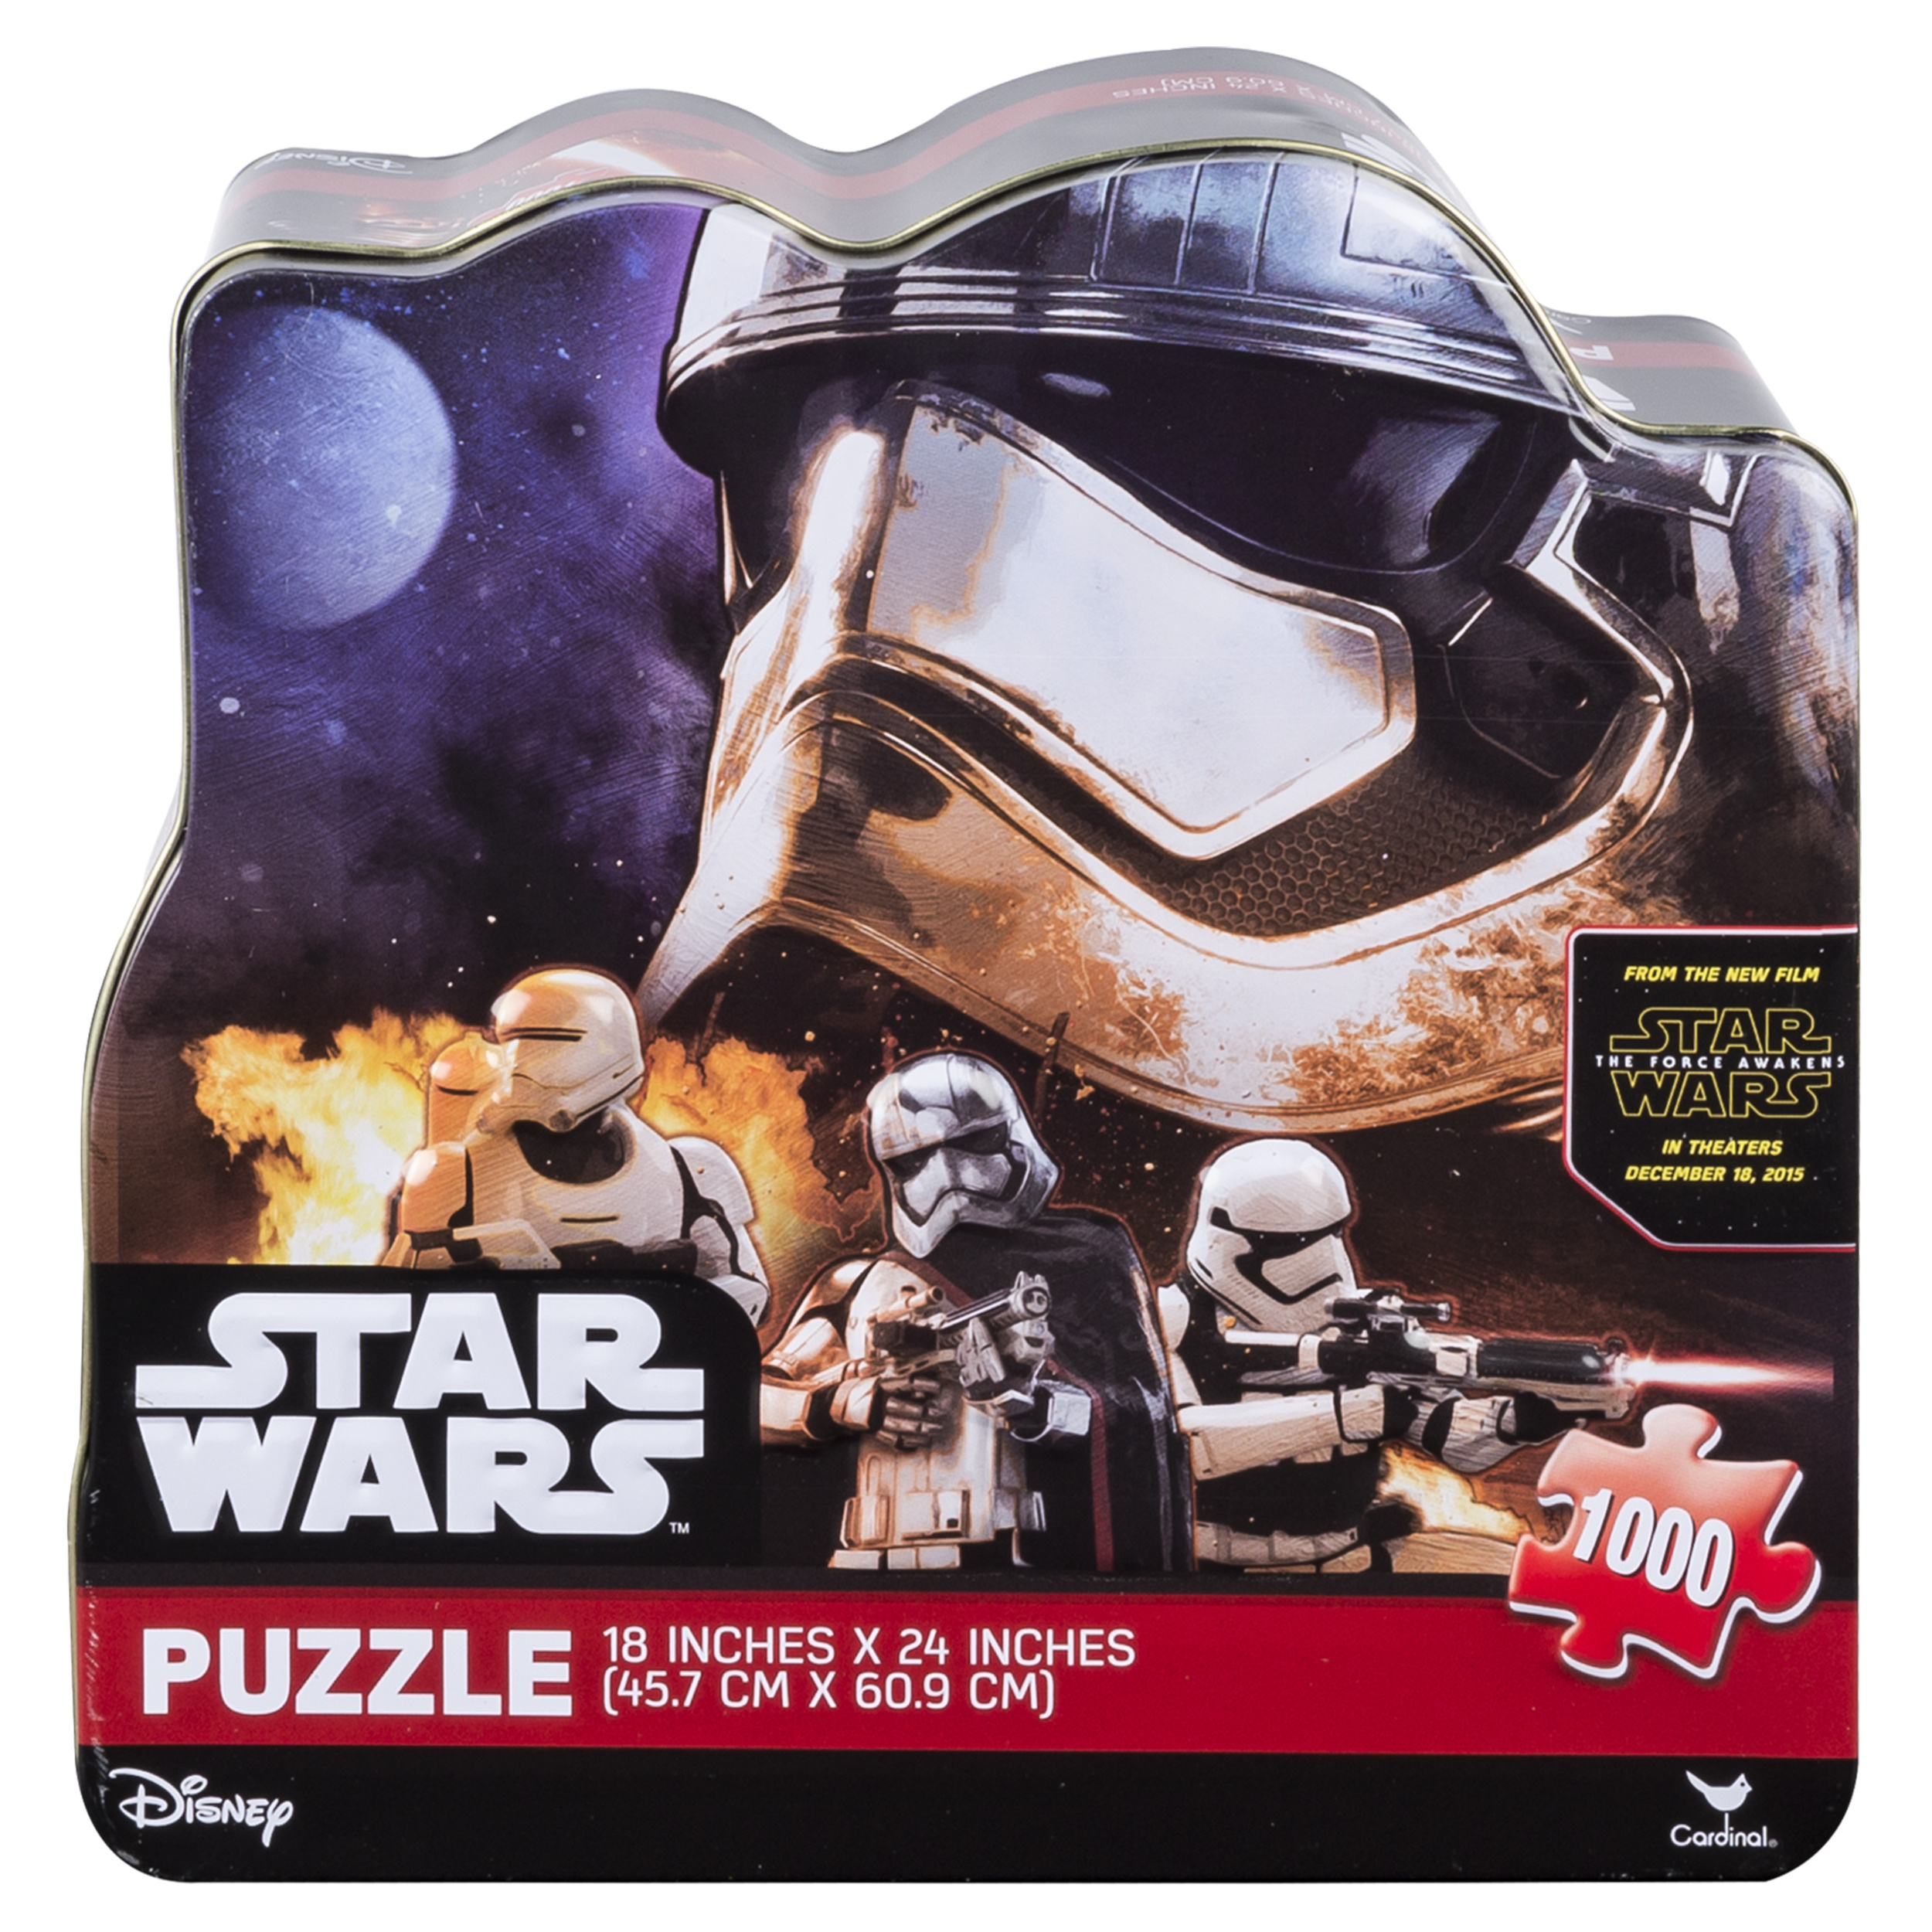 Star Wars Episode 7 Collectors Puzzle with Tin - image 1 of 3